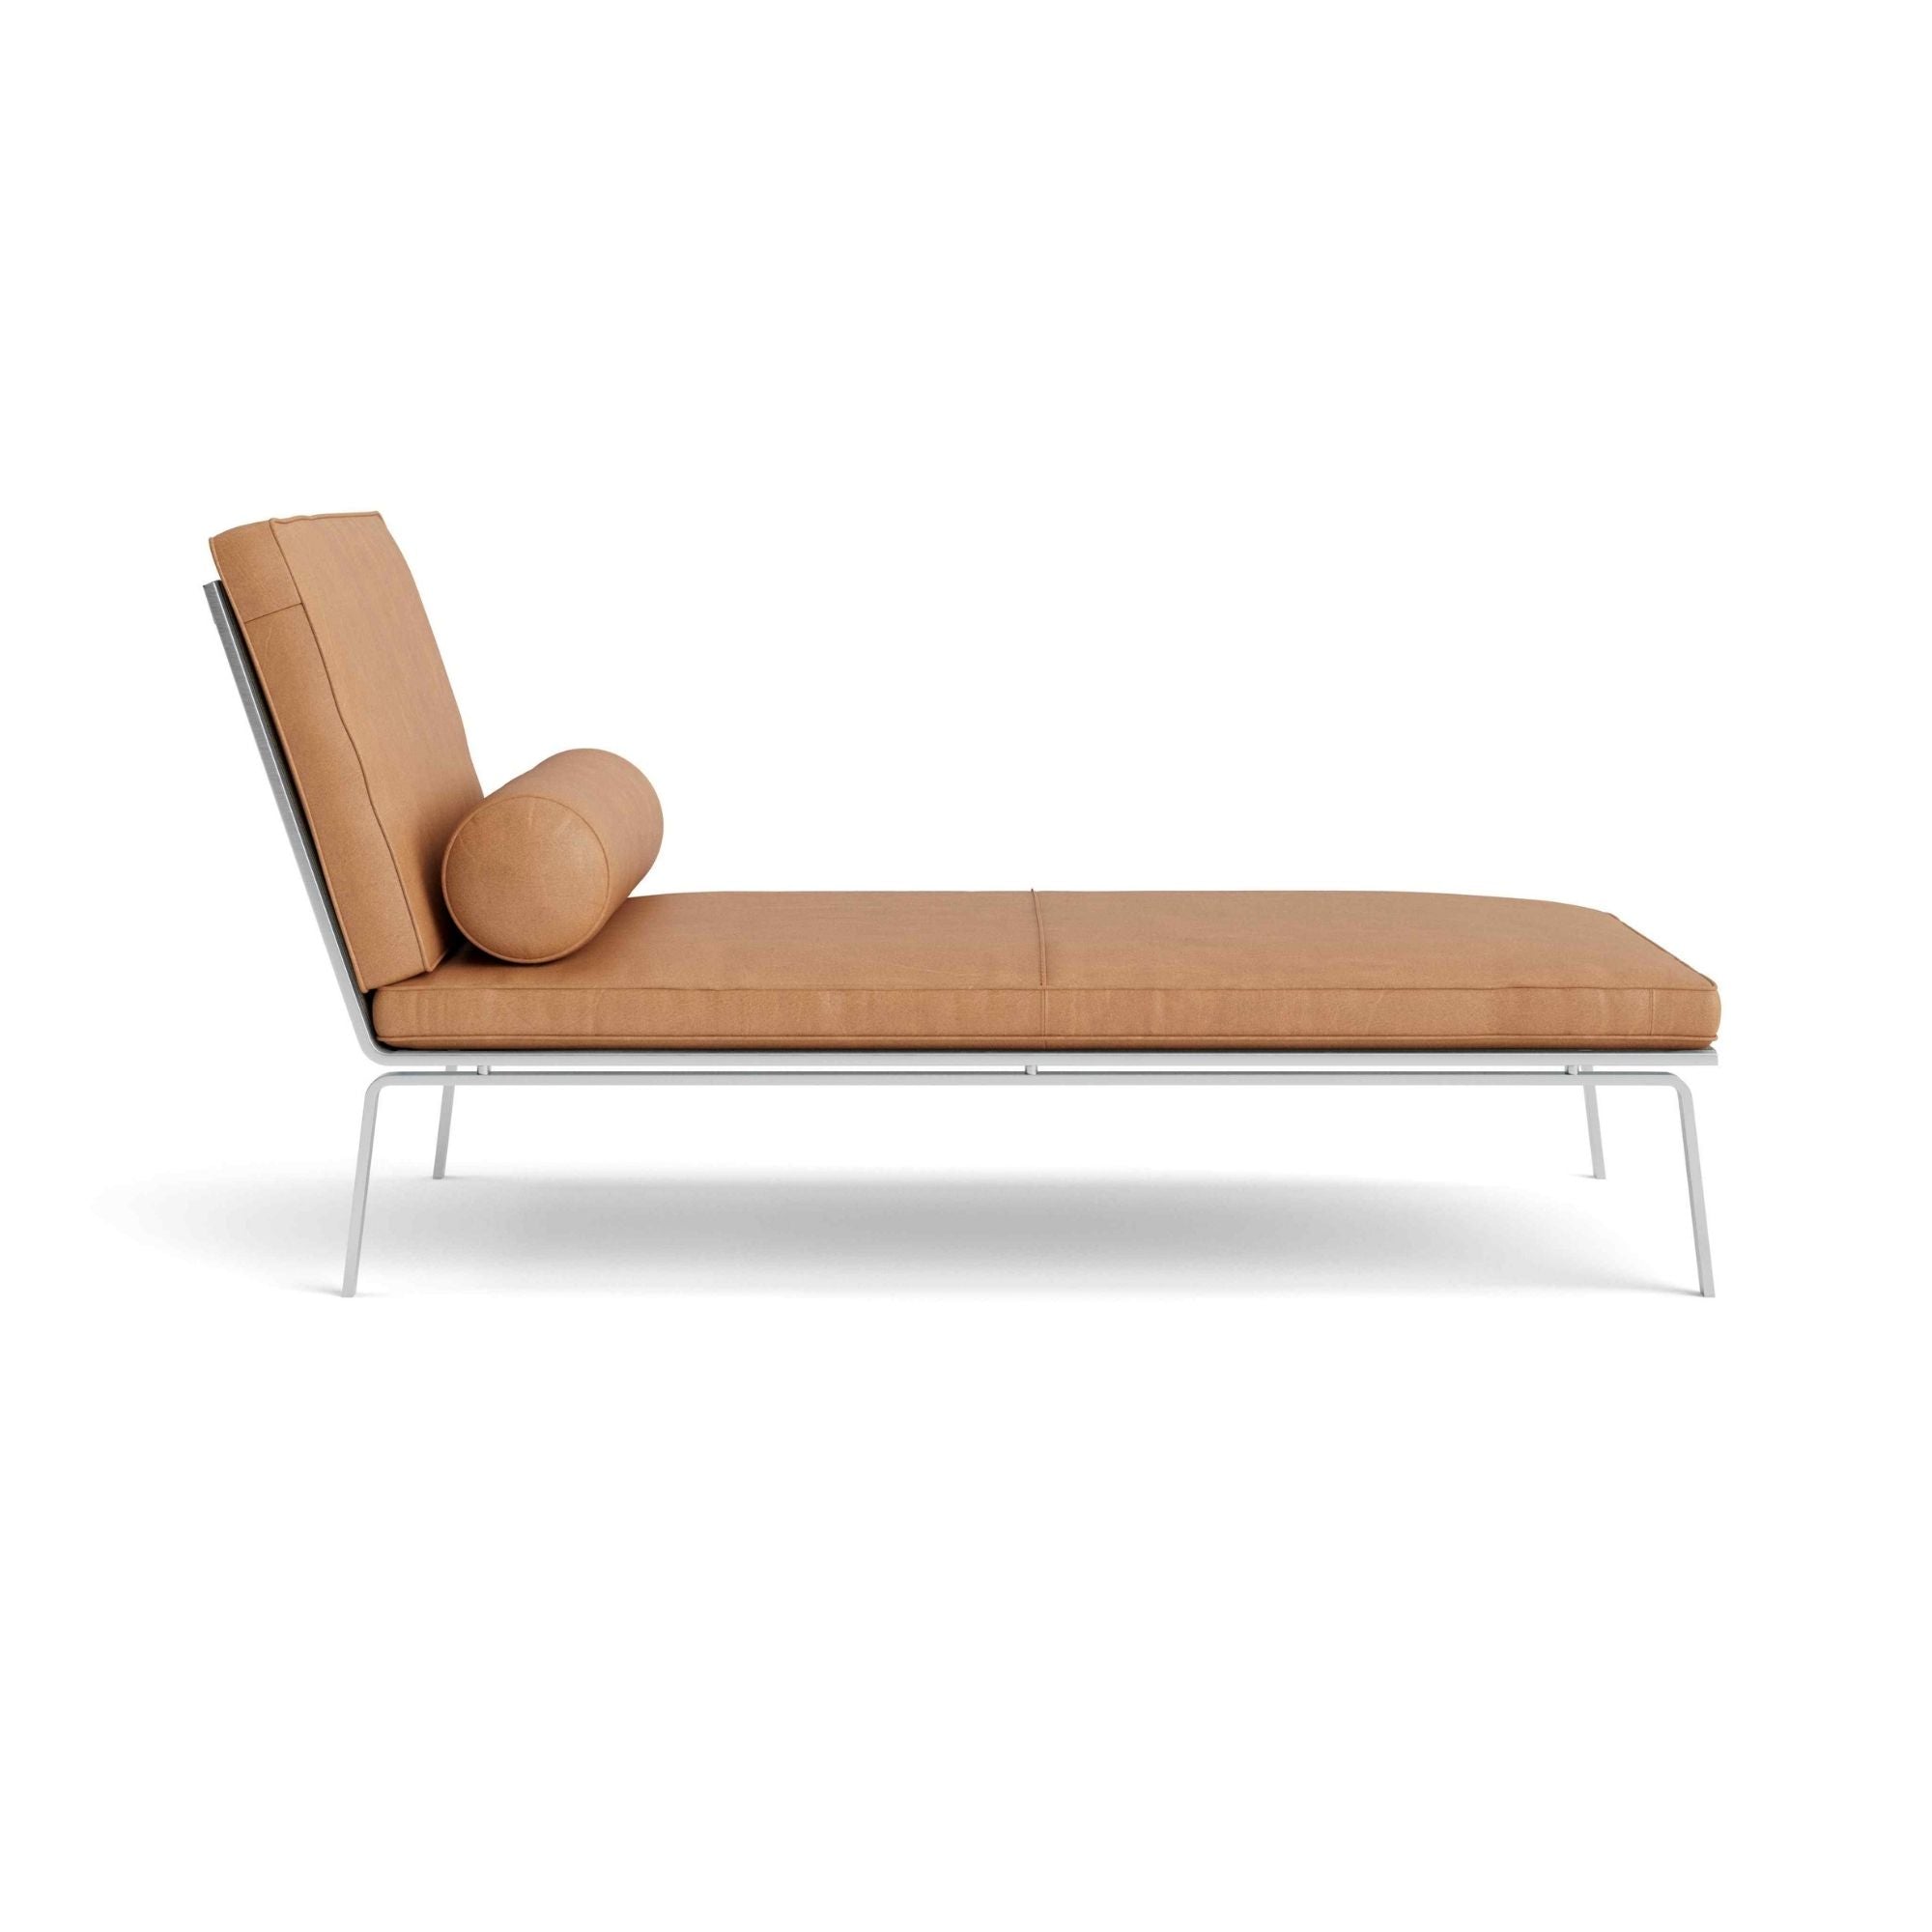 Man Chaise Lounge - Leather